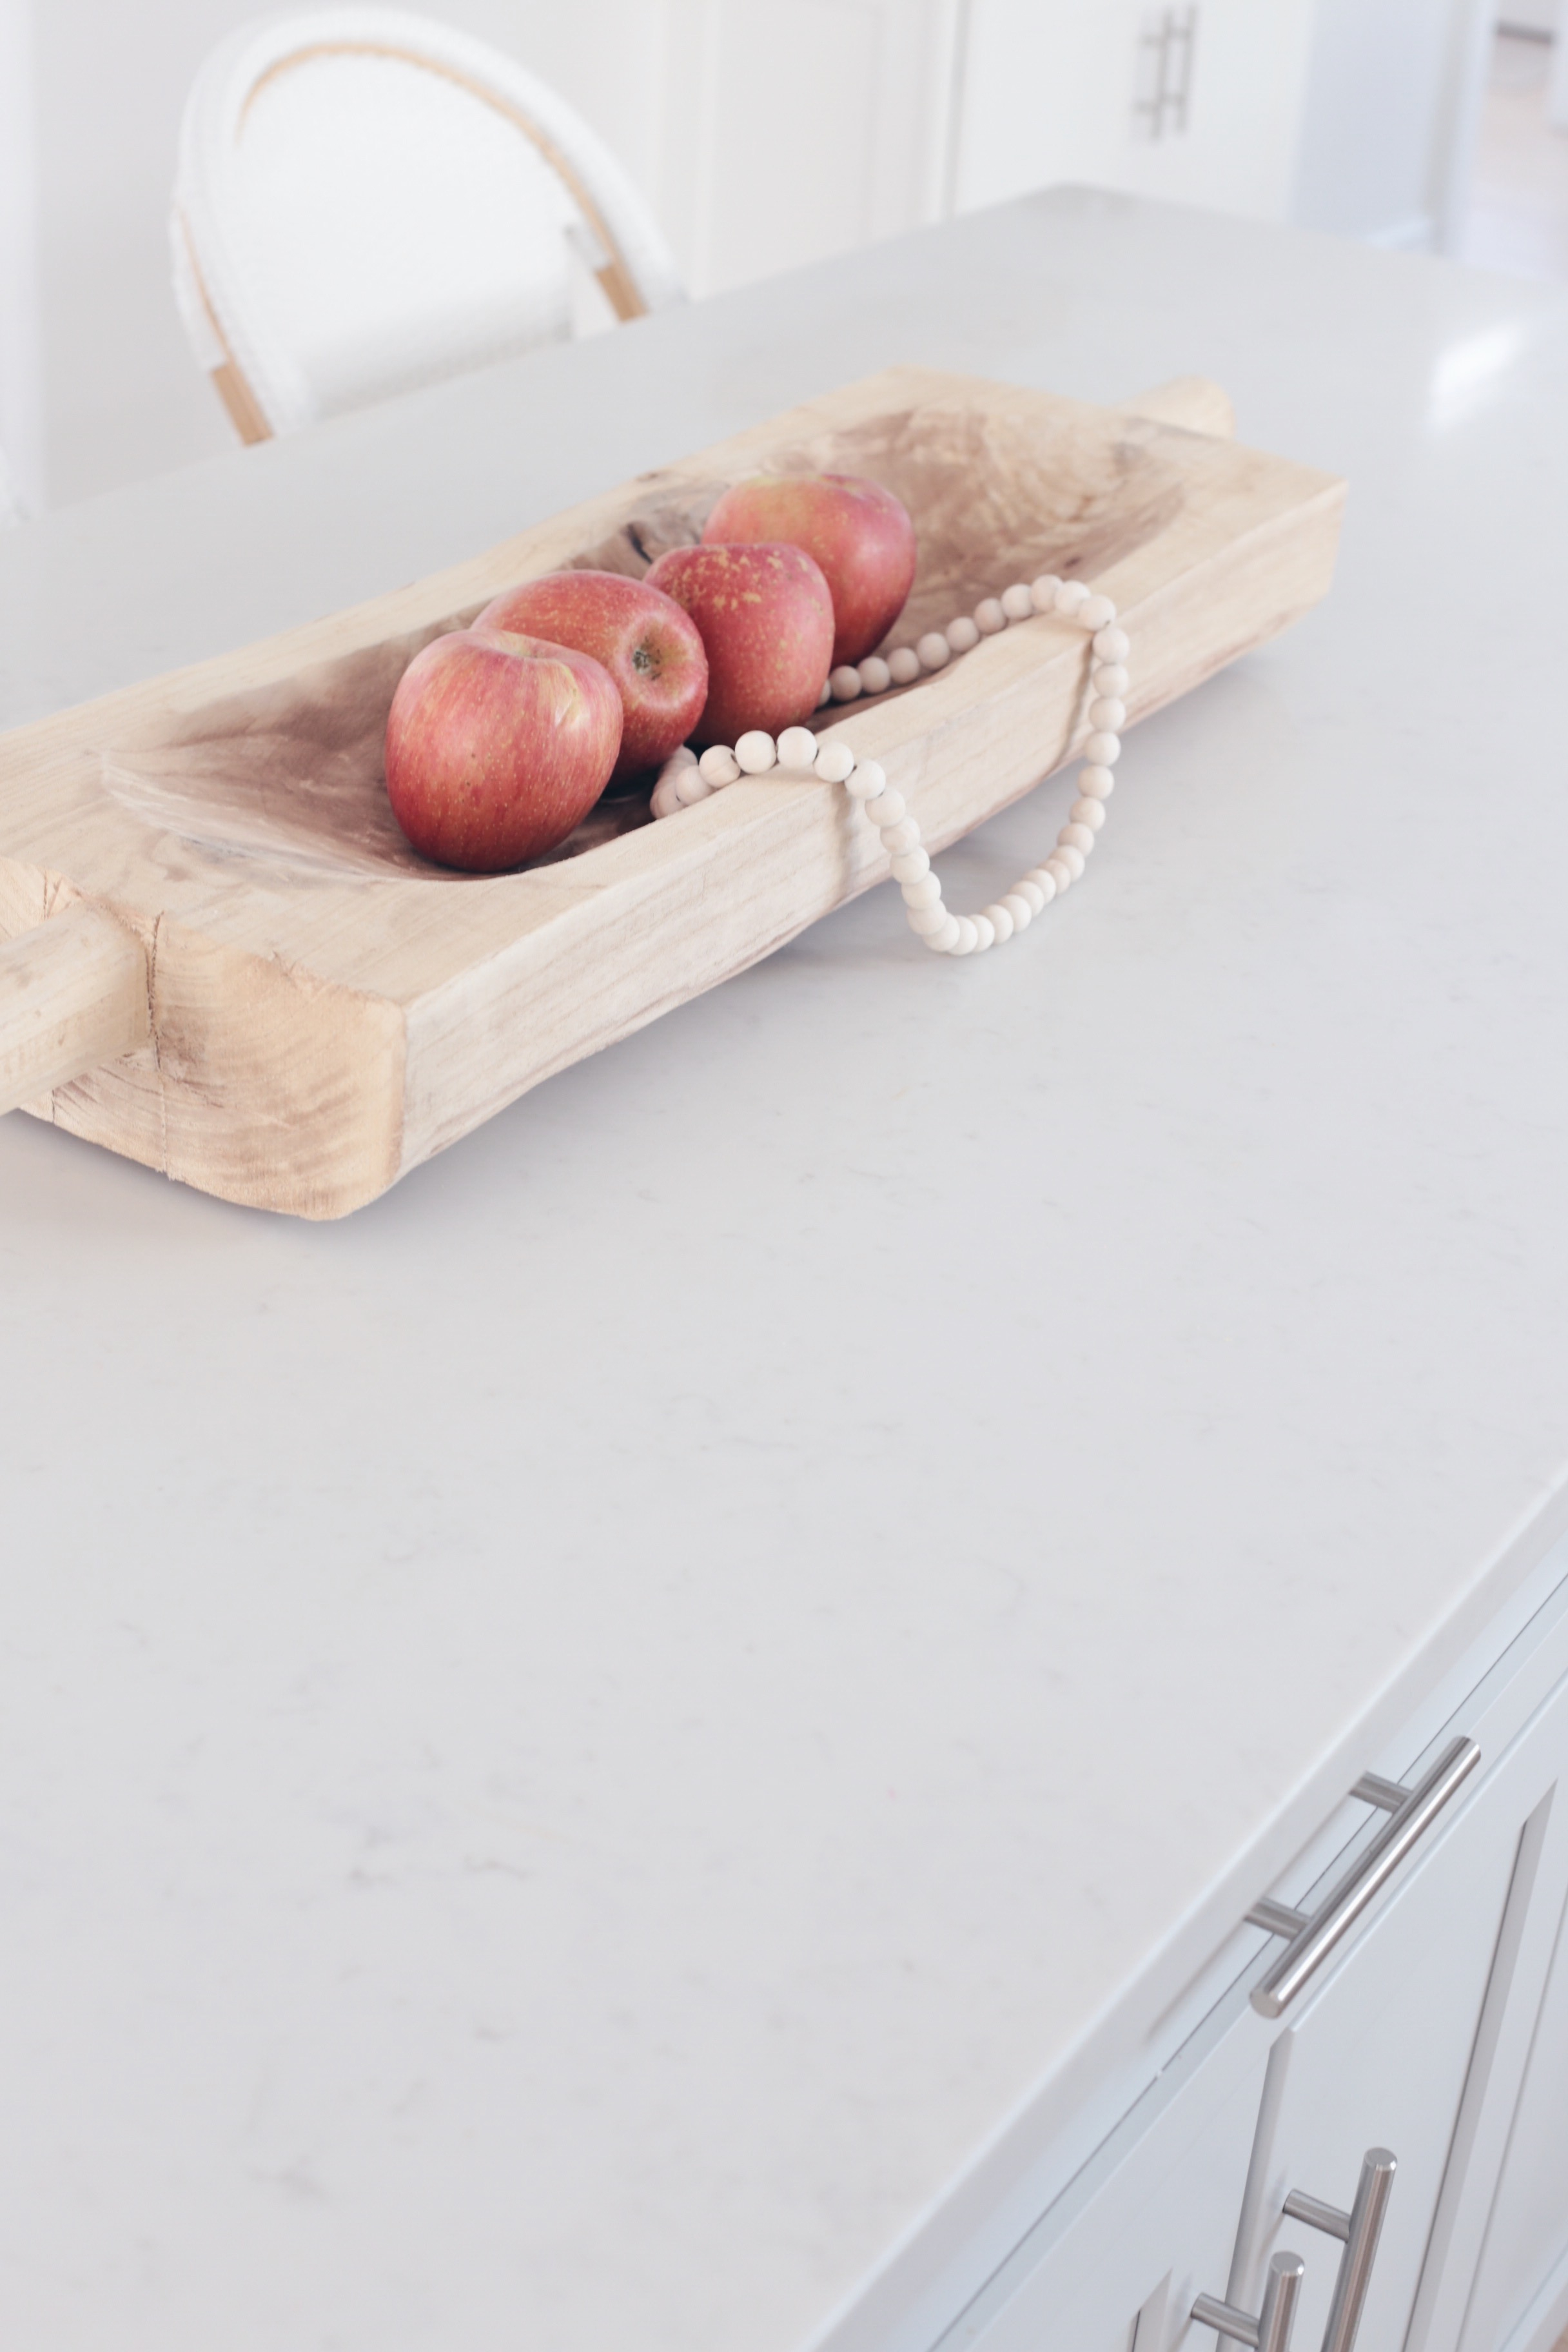 MUST READ - Number 1 tip when planning a kitchen renovation - kitchen island with quartz marble look counters